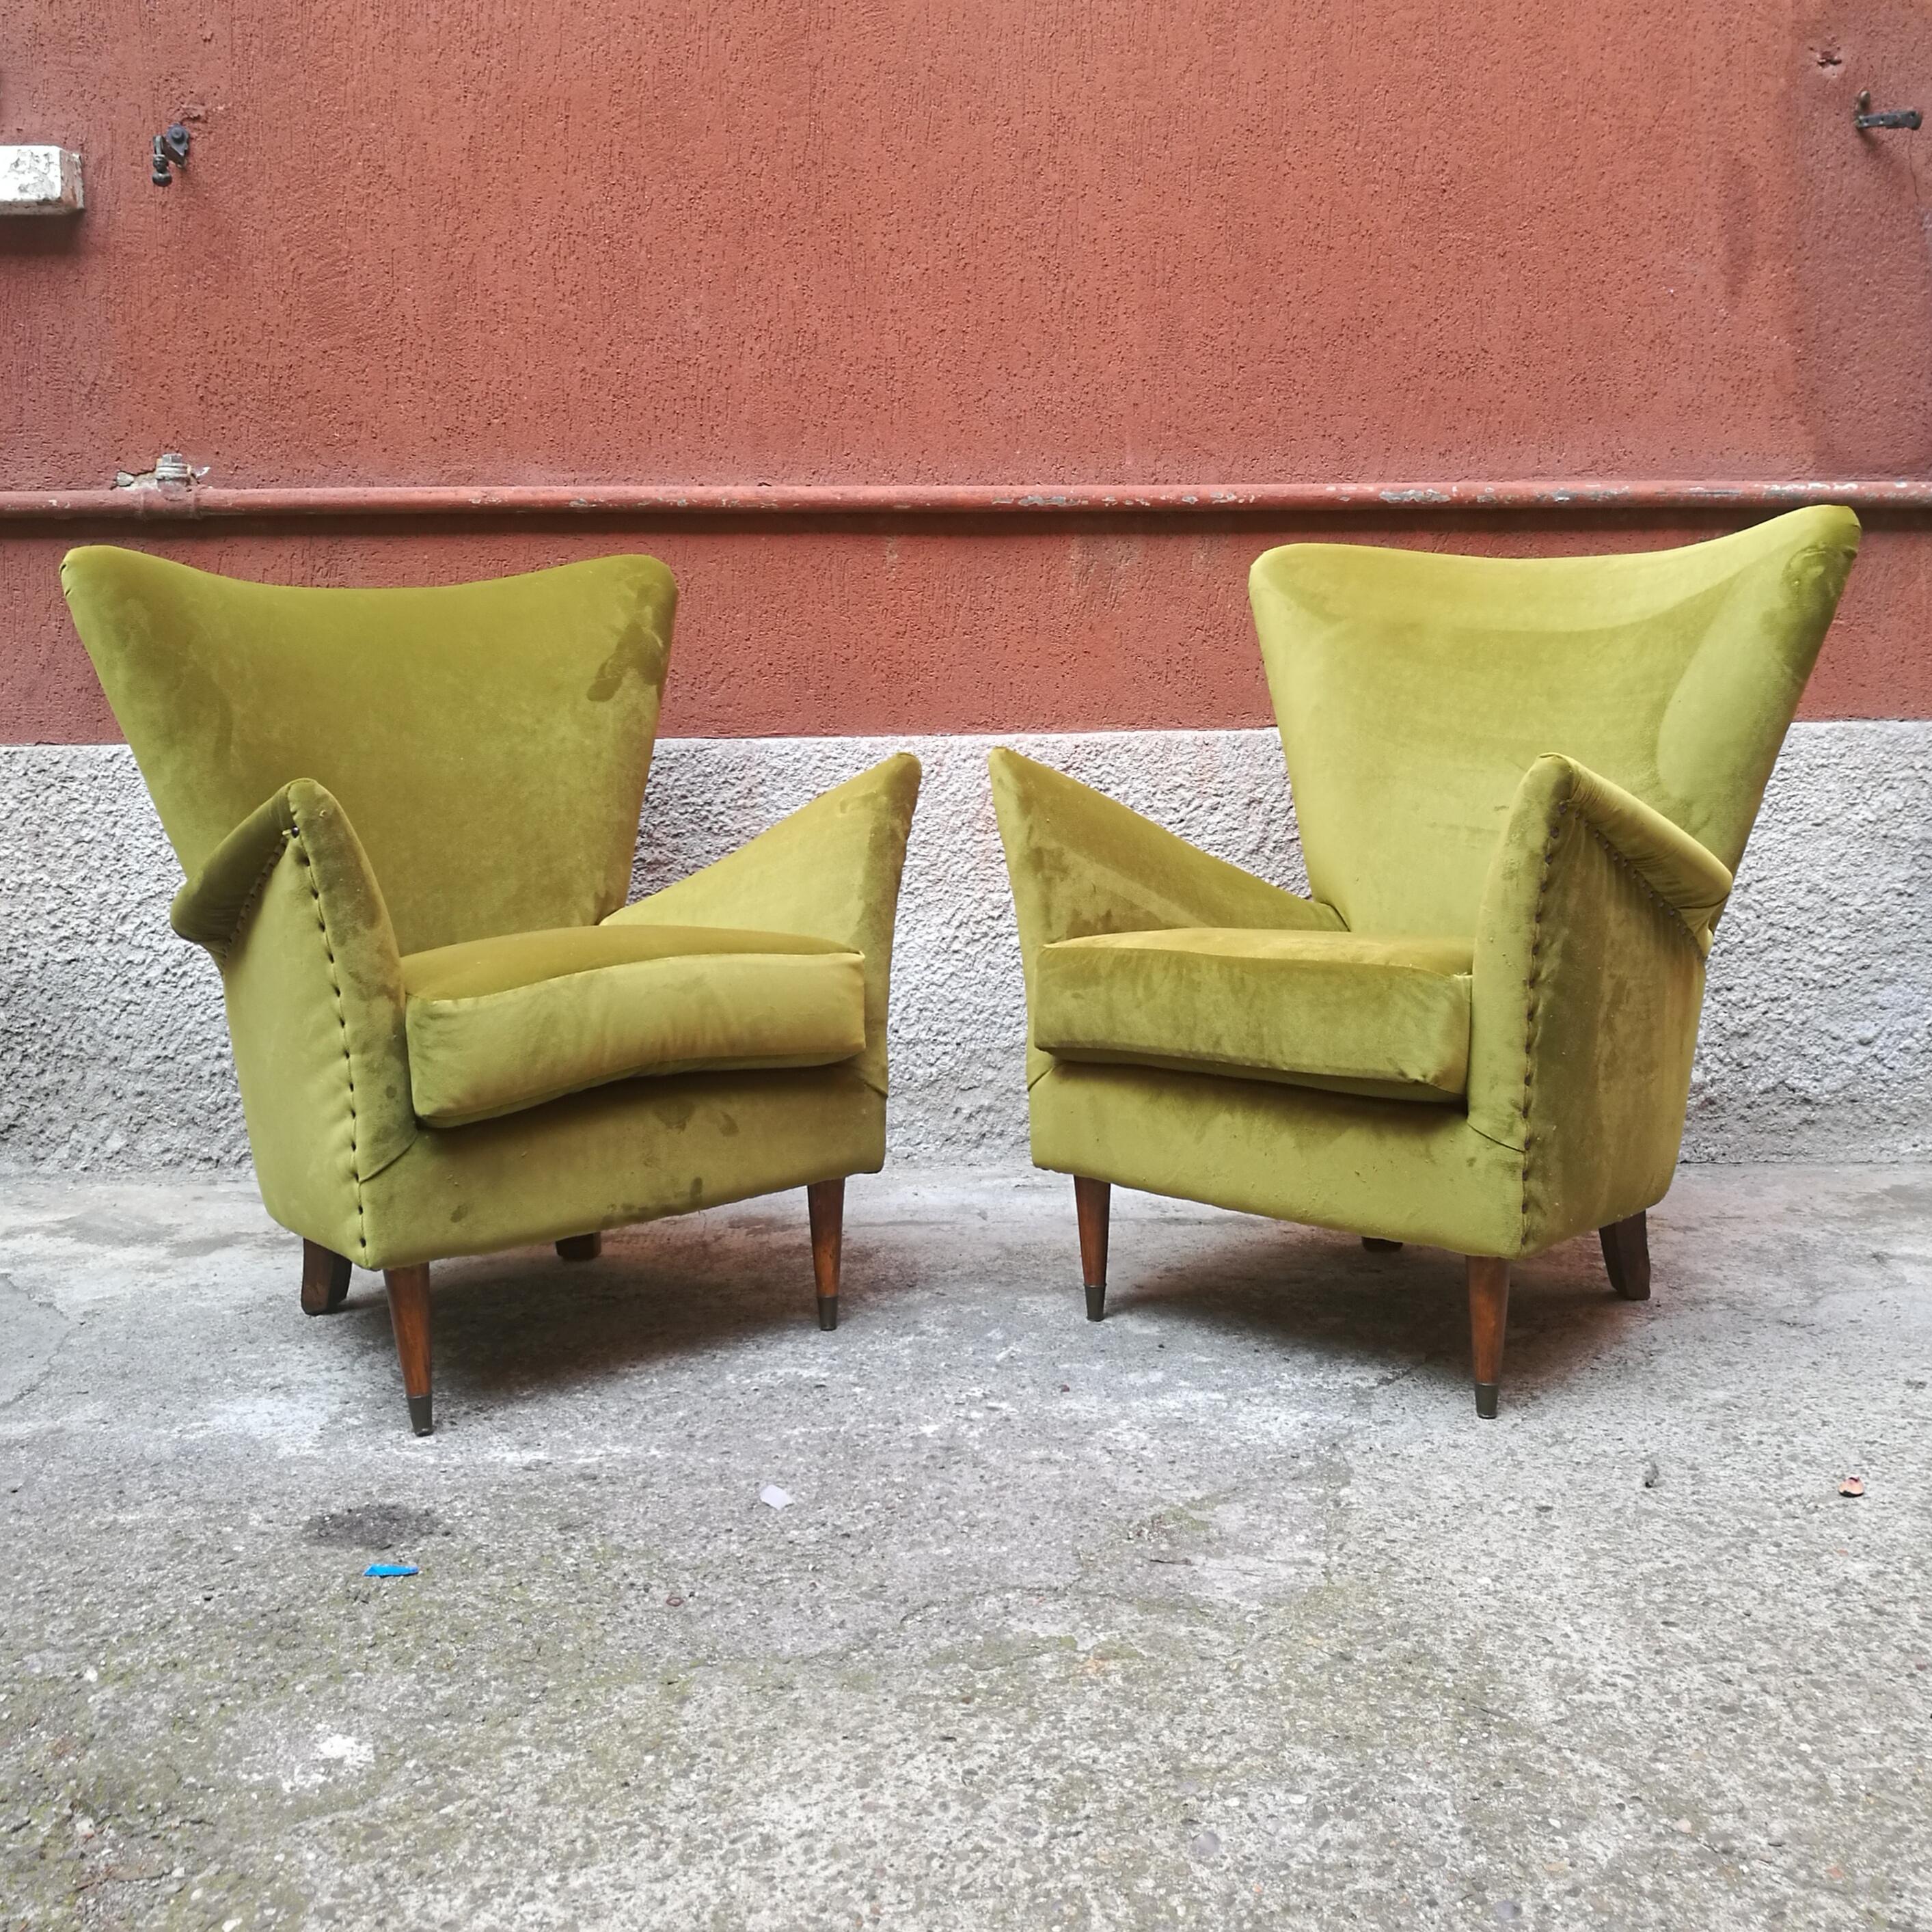 Pair of Italian armchairs from 1950s
Couple of stunning armchairs, coming from Italy, approximately from 1950, totally in the style of Gio Ponti. Upholstered in green velvet, with hubcaps on the back and four wooden legs with brass details, the